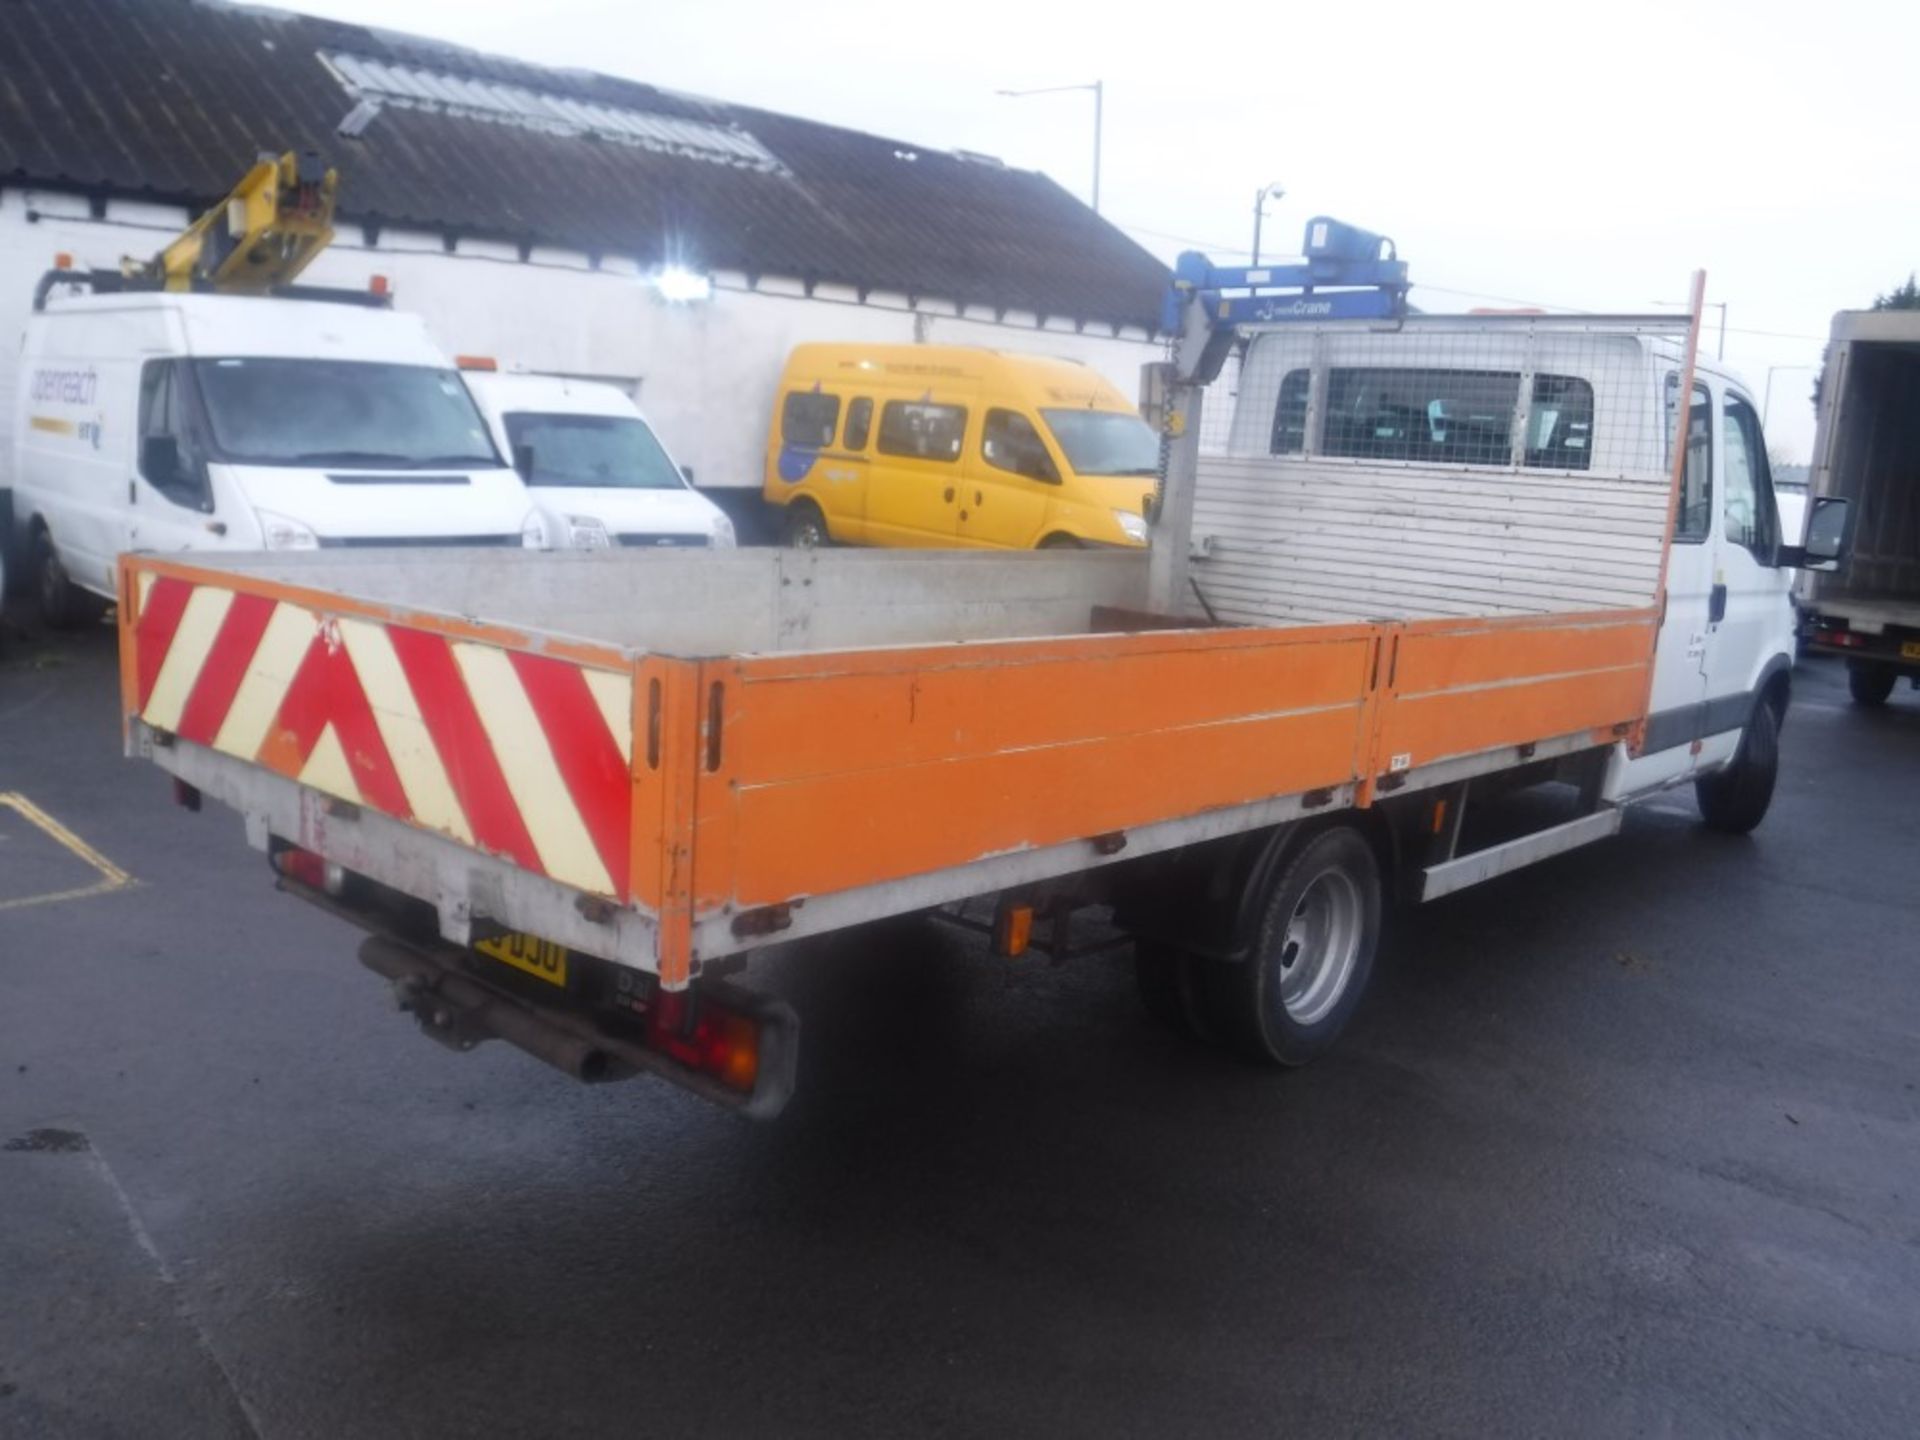 54 reg IVECO DAILY 50C17 DROPSIDE, SWING CRANE, 7 SEATER CAB, 1ST REG 11/05, TEST 01/20, 58011KM - Image 4 of 5